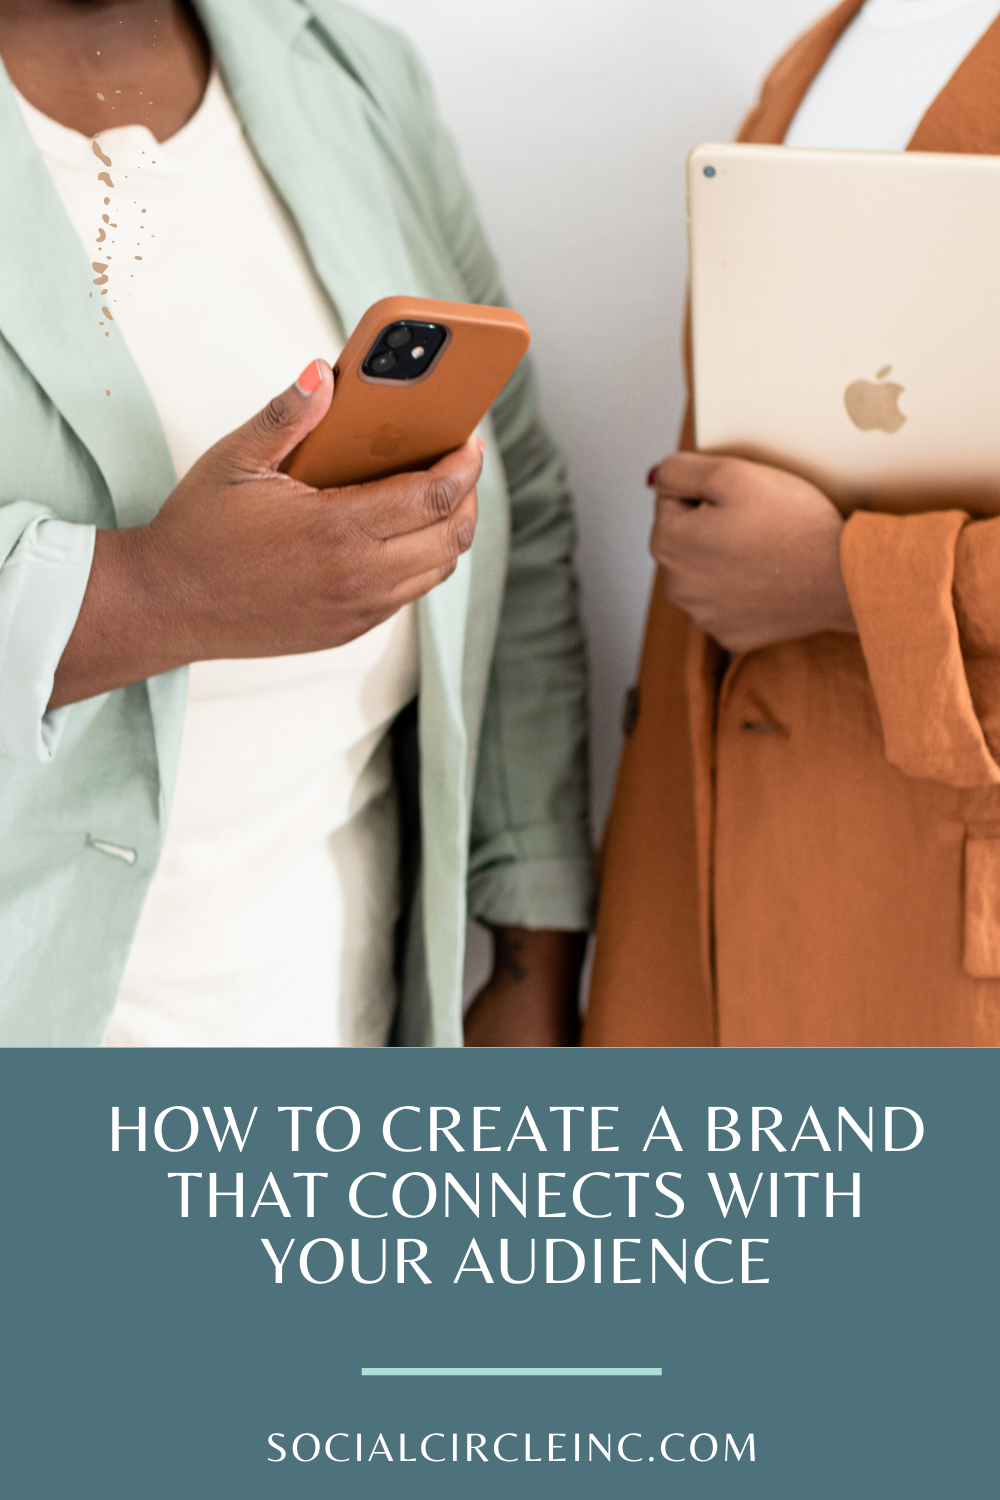 How to Create a Brand that Connects with Your Audience 4